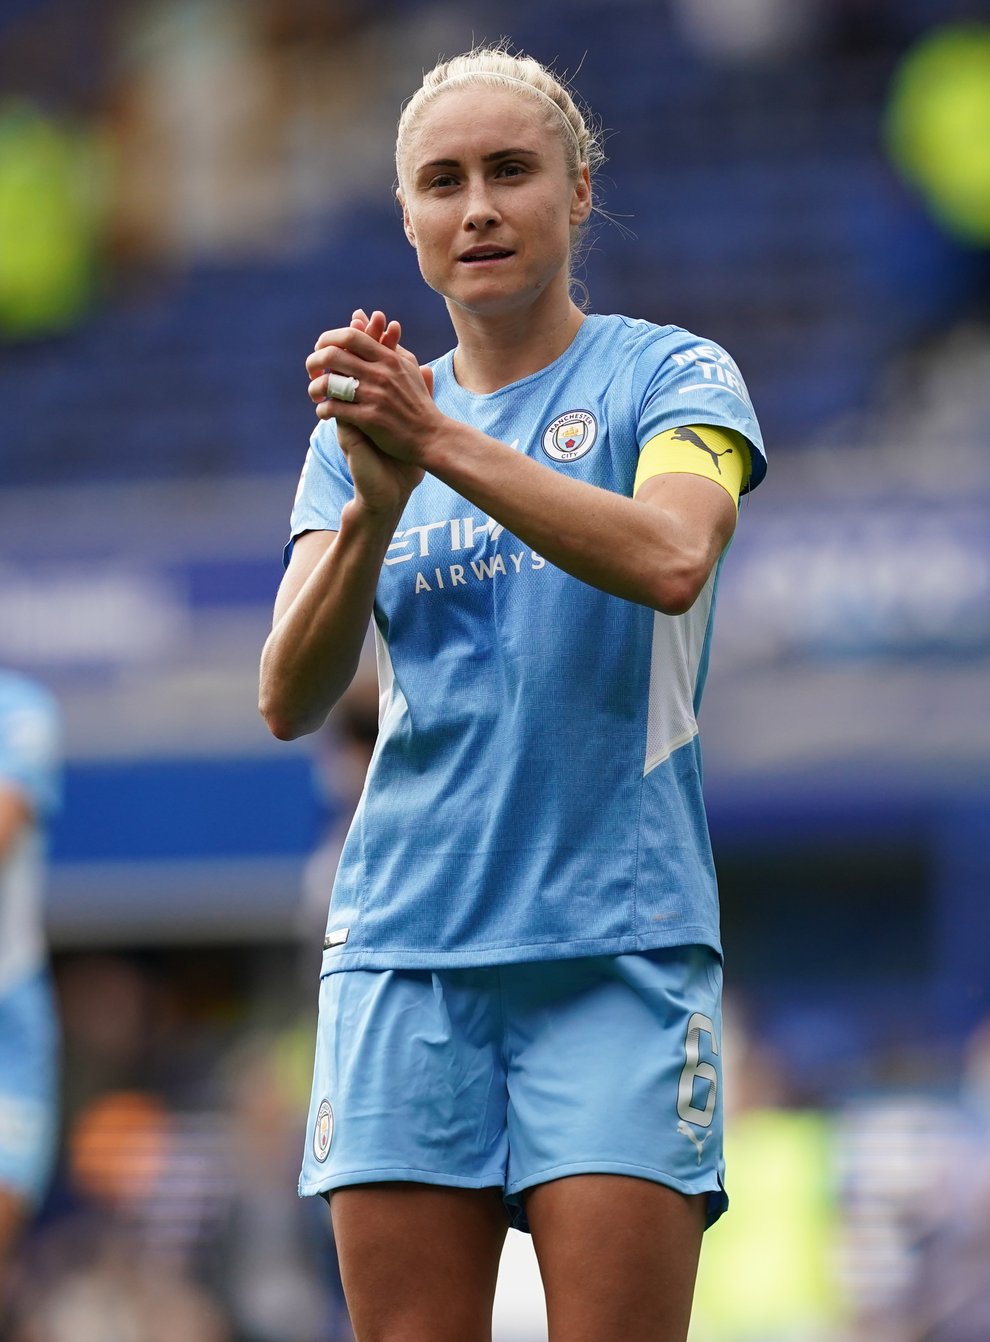 Steph Houghton is back in action with Manchester City after injury (Martin Rickett/PA)